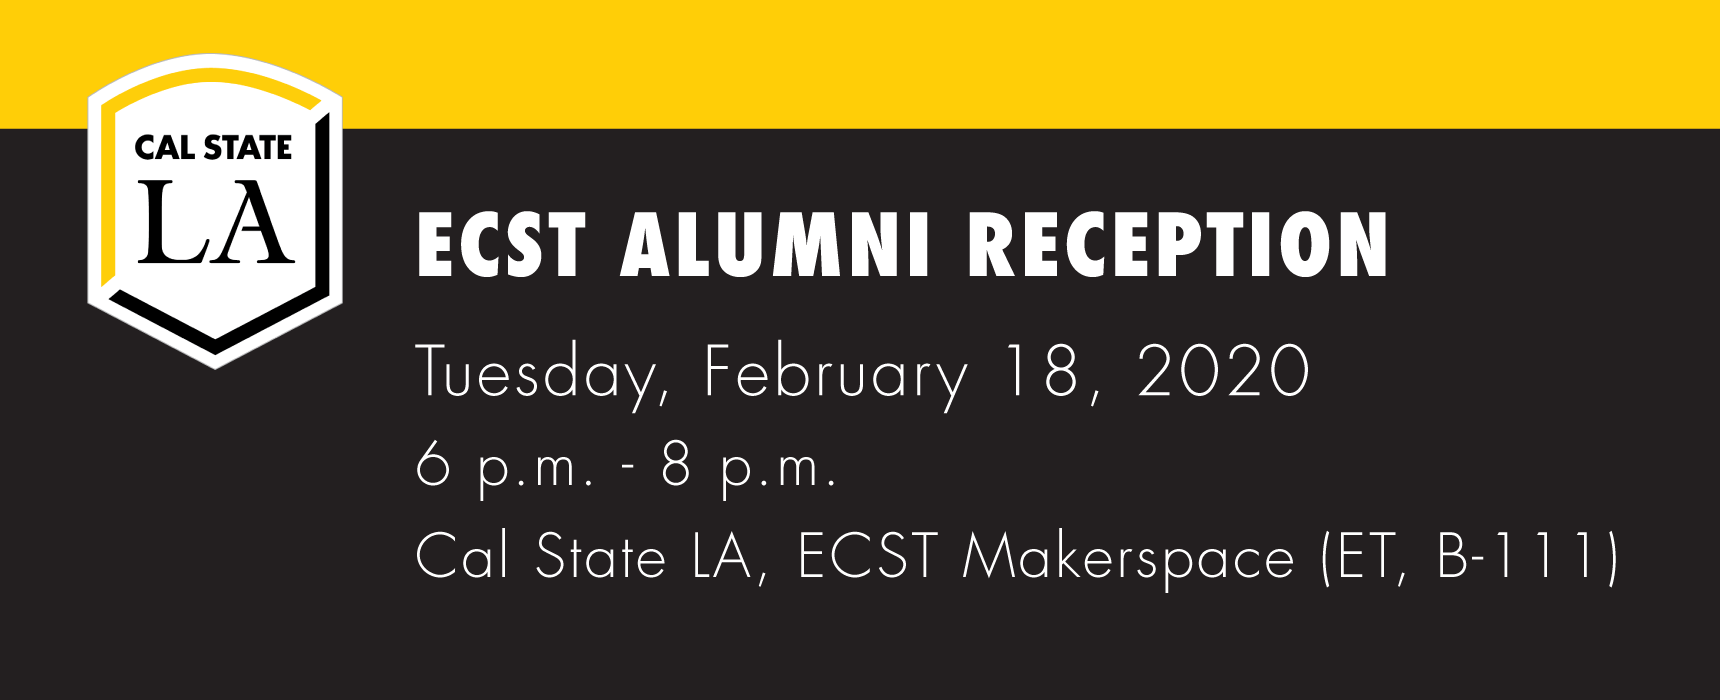 ECST Alumni Reception 2020. Tuesday, Feb 18, 6 to 8pm at Cal State LA ECST Makerspace.